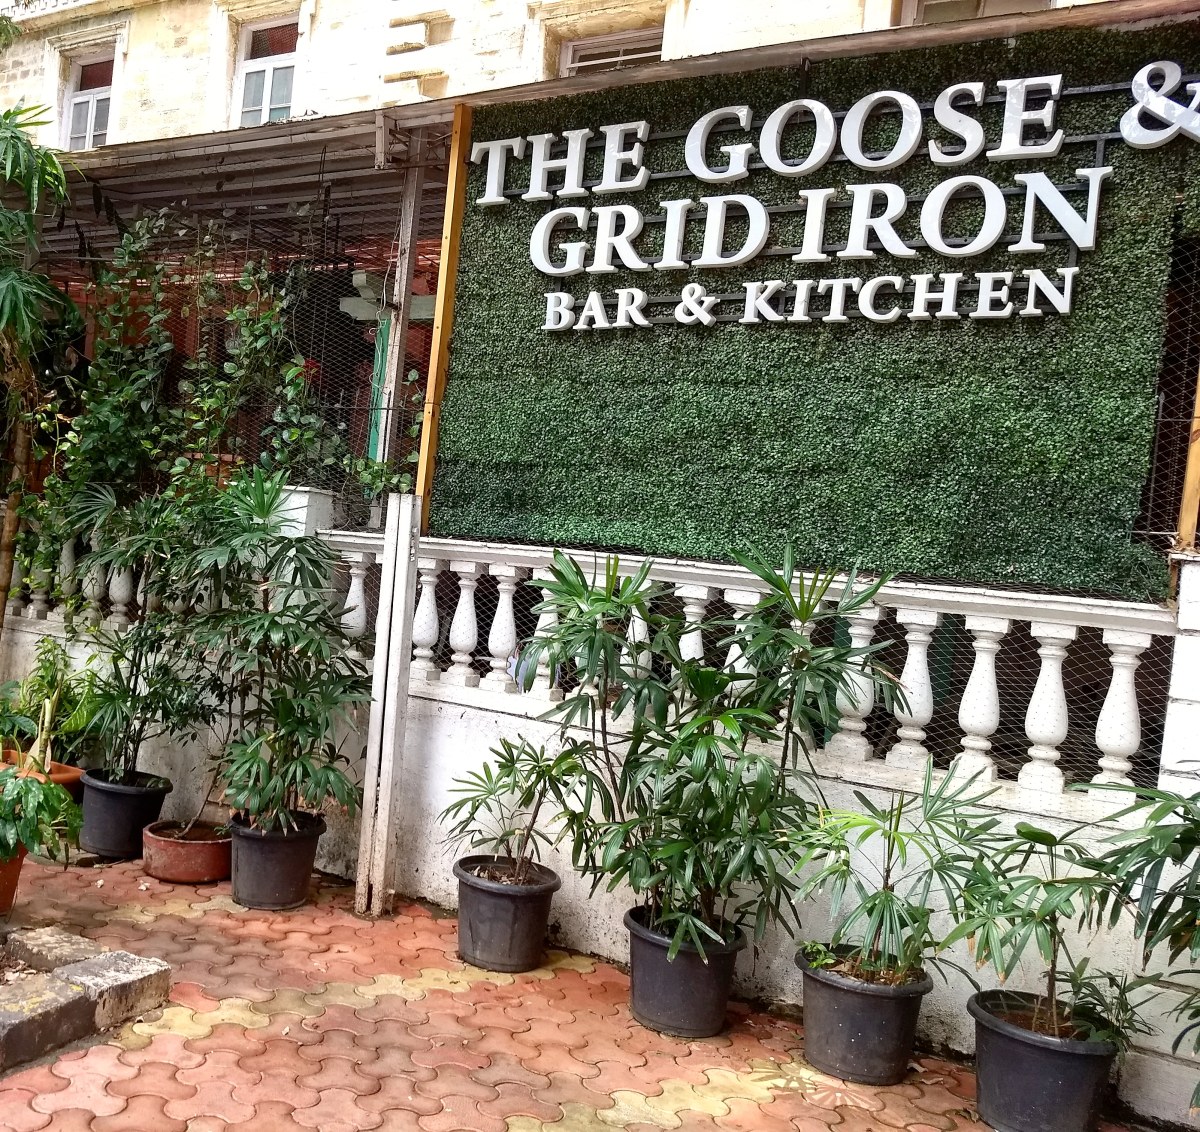 Top 5 dishes (and glasses, perhaps) to try at ‘THE GOOSE AND GRIDIRON,FORT’